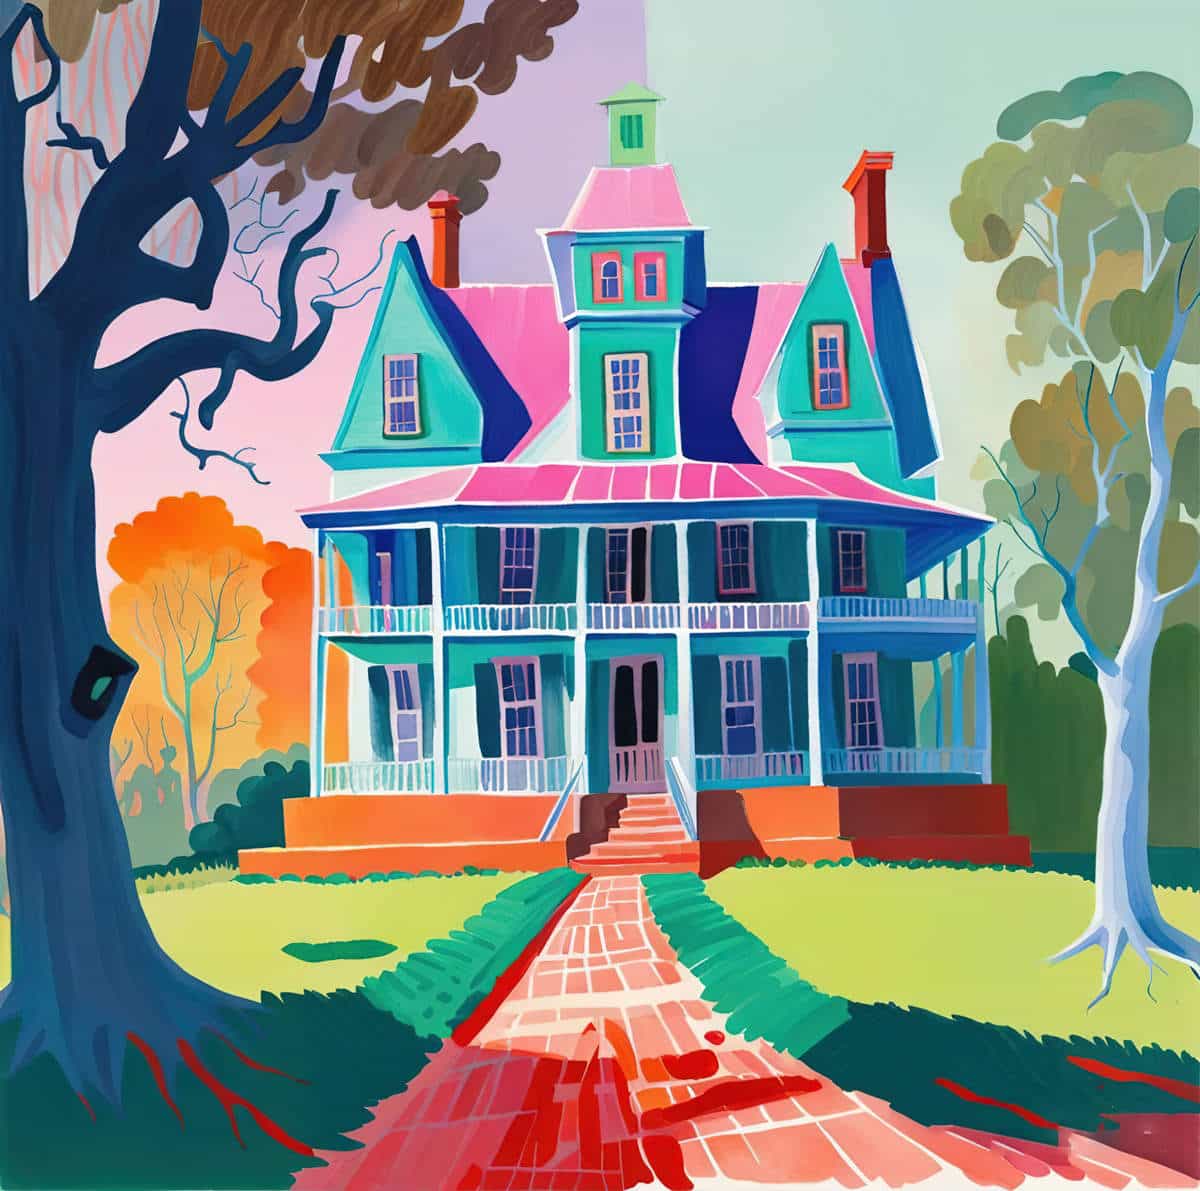 “A Visit” (“The Lovely House”) by Shirley Jackson Analysis